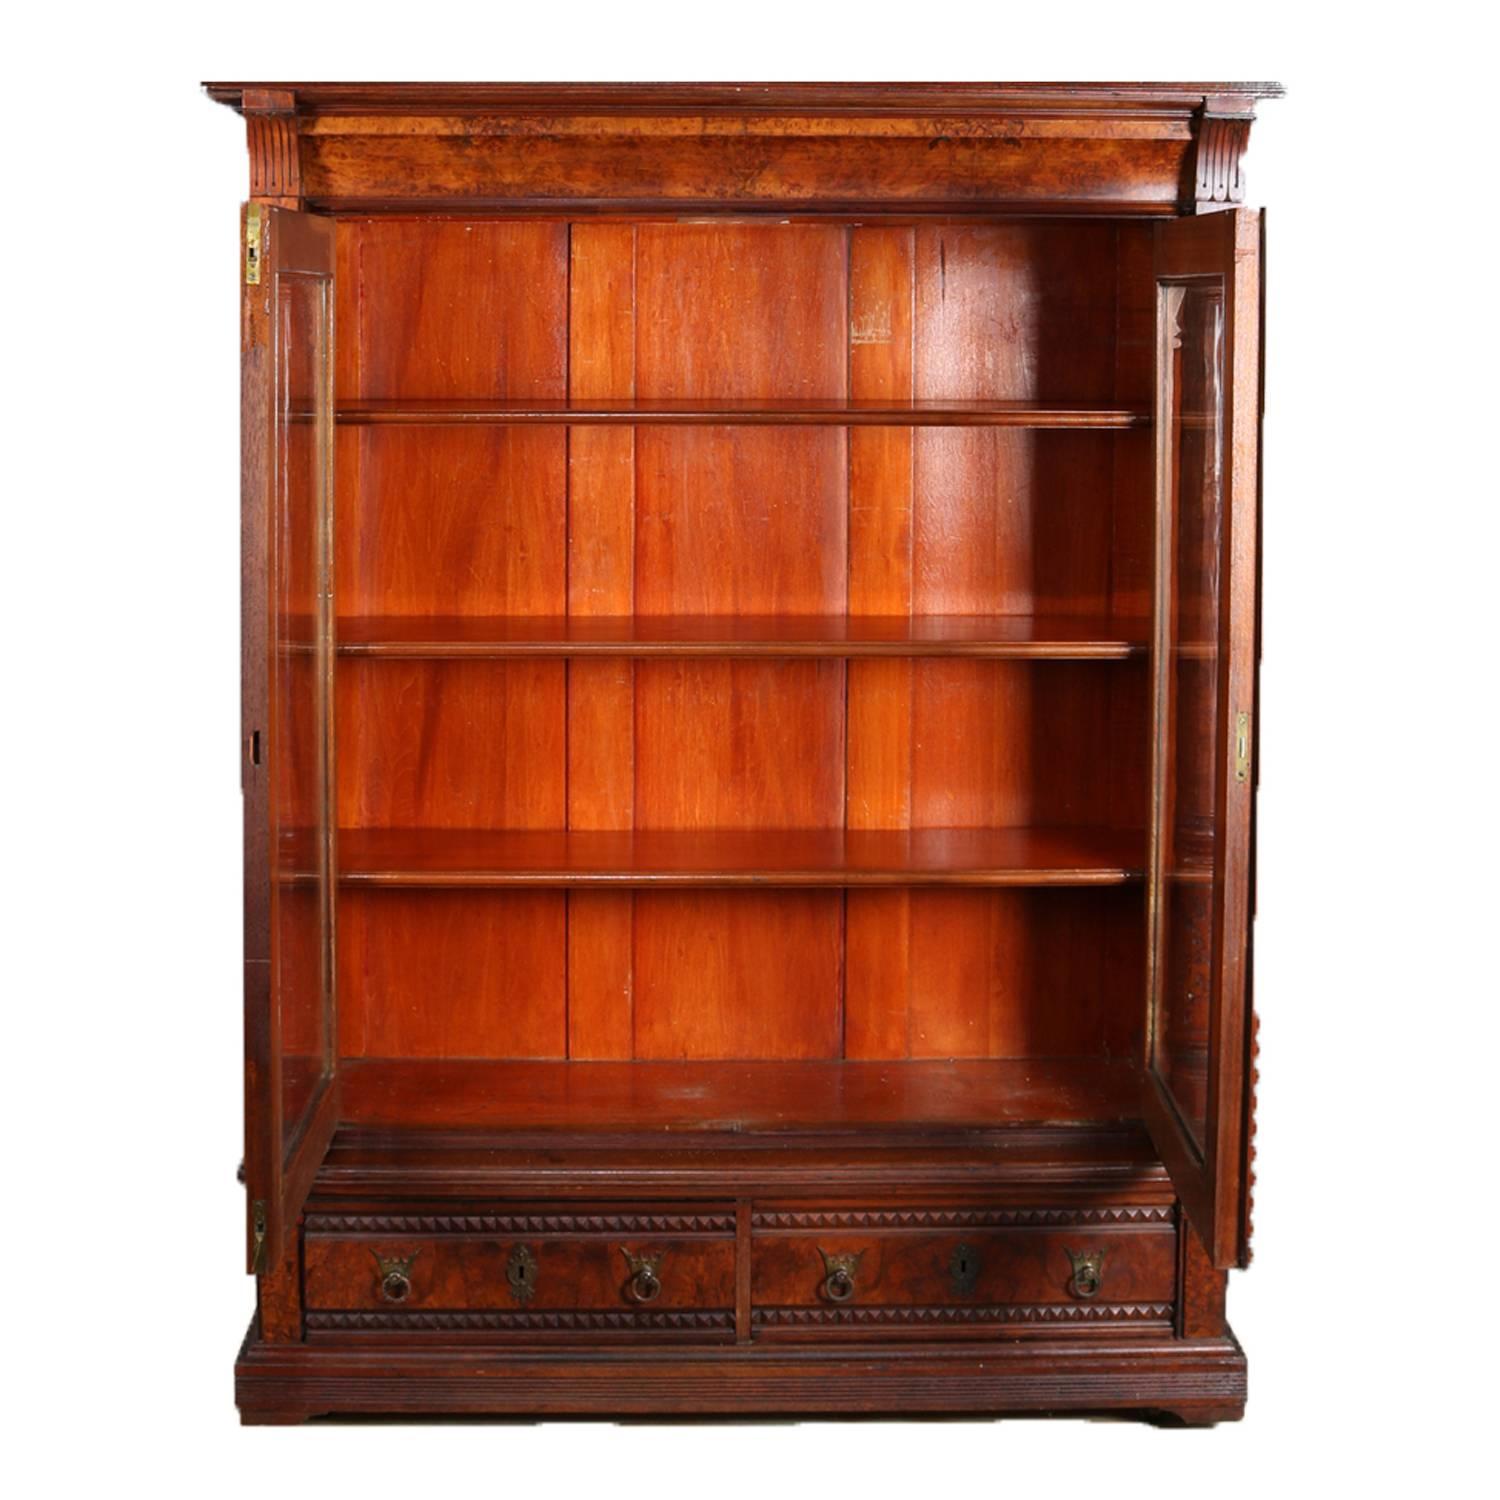 Antique Eastlake bookcase features burl walnut construction with brass gallery with cove molded crest above case with two glass doors opening to shelved interior flanked by floral and foliate incised columns and over two drawers with bronze crown